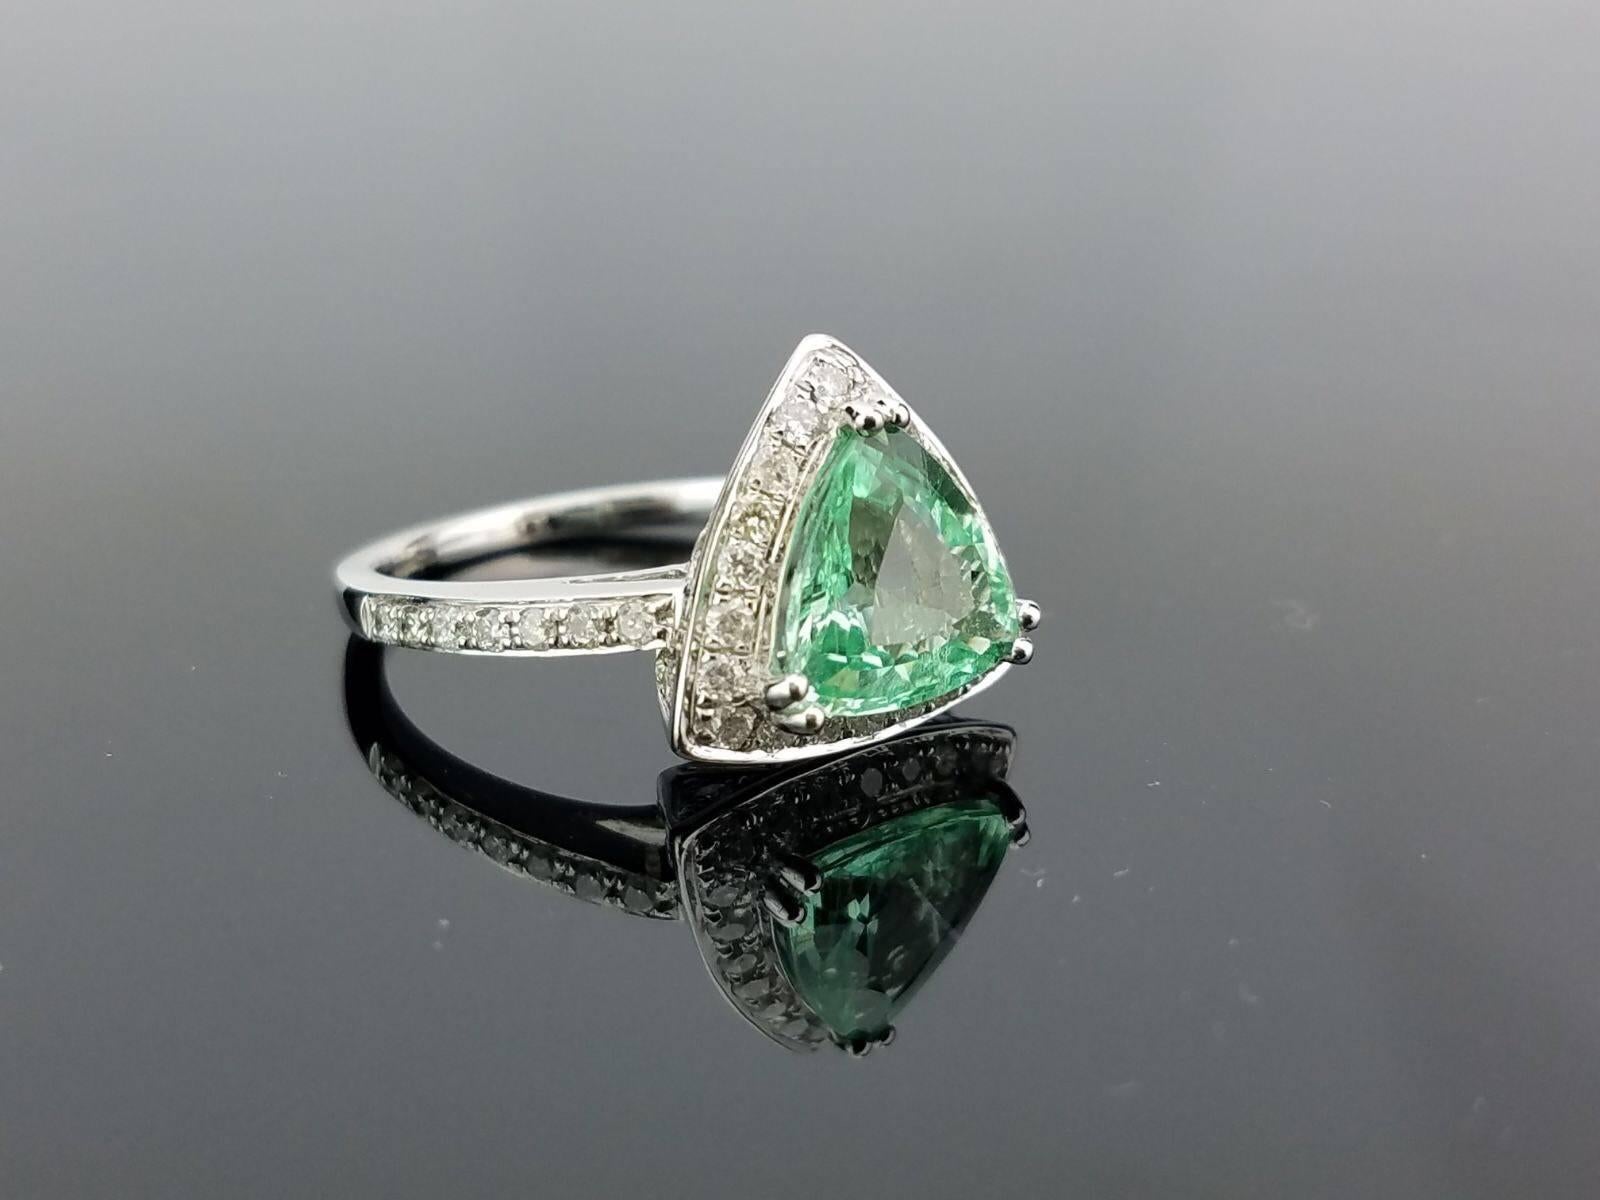 An elegant ring using a beautiful blue-green coloured, rare, trillion shaped Pariaba, surrounded with White Diamond, all set in 18K white gold. 

Stone Details: 
Stone: Pariaba
Carat Weight:  1.87Carats

Diamond Details: 
Total Carat Weight: 0.6